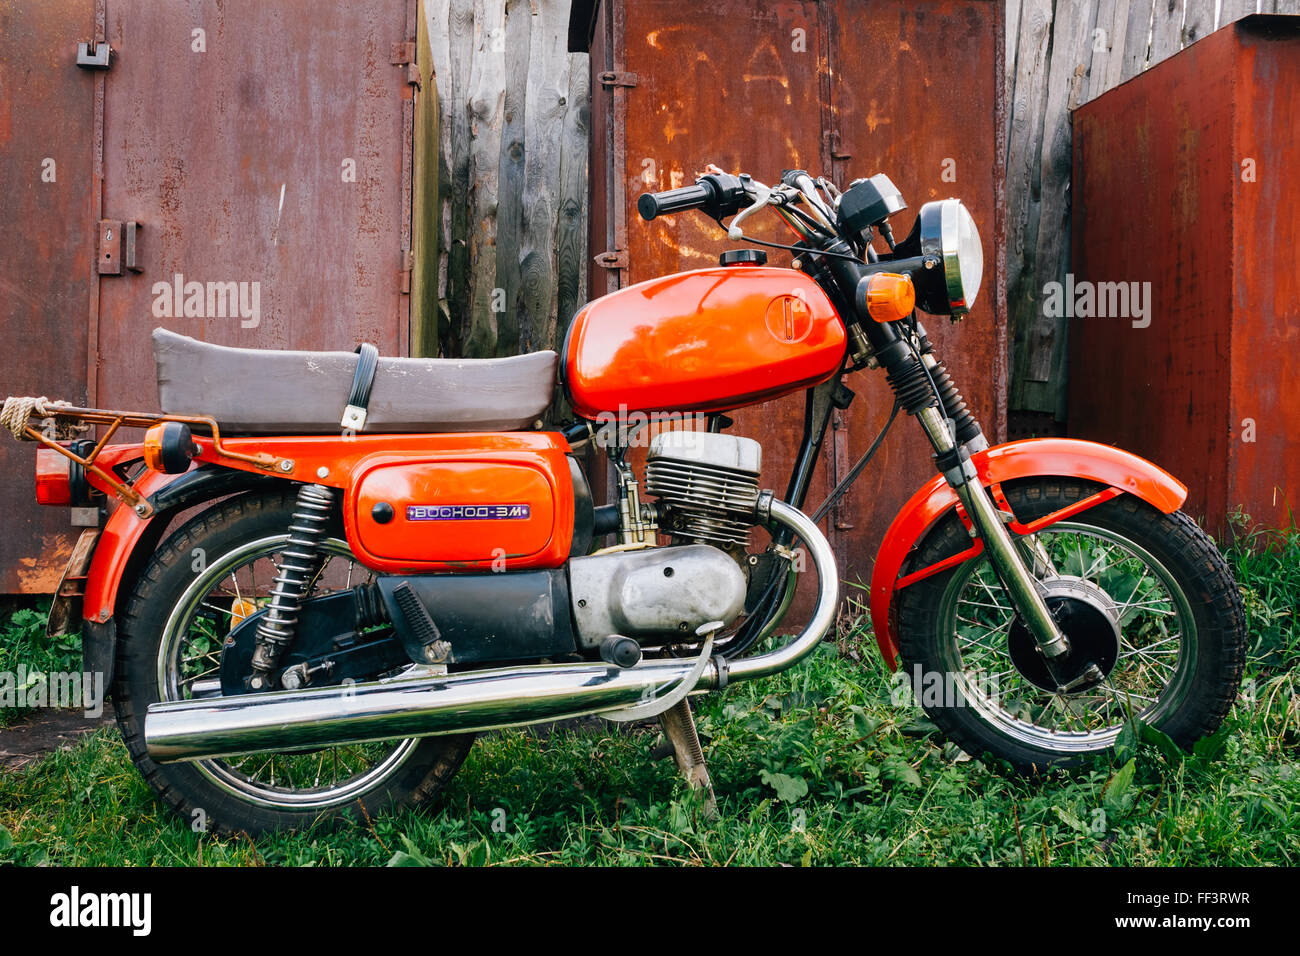 MINSK, BELARUS - SEPTEMBER 22, 2013: Old Red Russian (Soviet) Motorcycle 'Voshod' Parked On Green Grass Yard. This motorcycles p Stock Photo